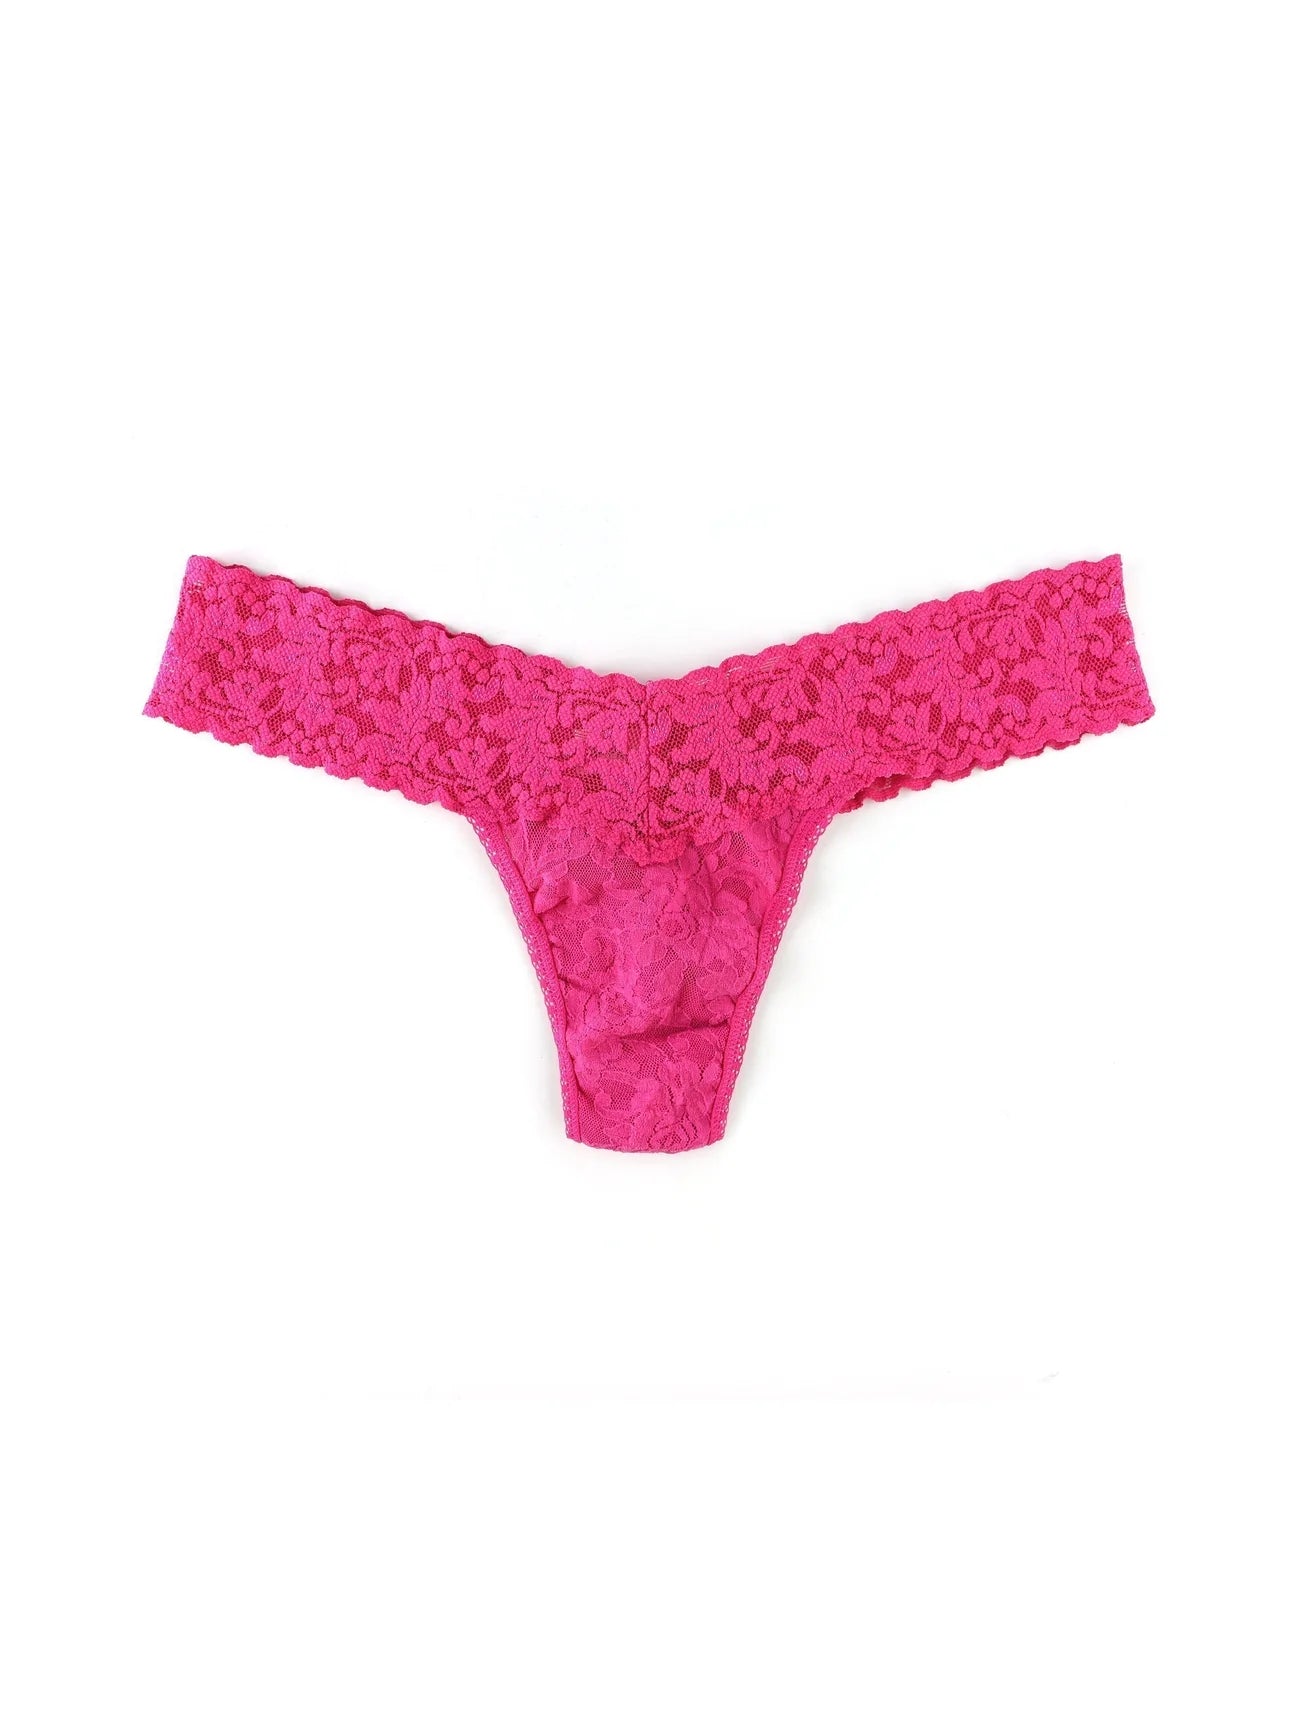 Signature Lace Original Rise Thong - Intuition Pink